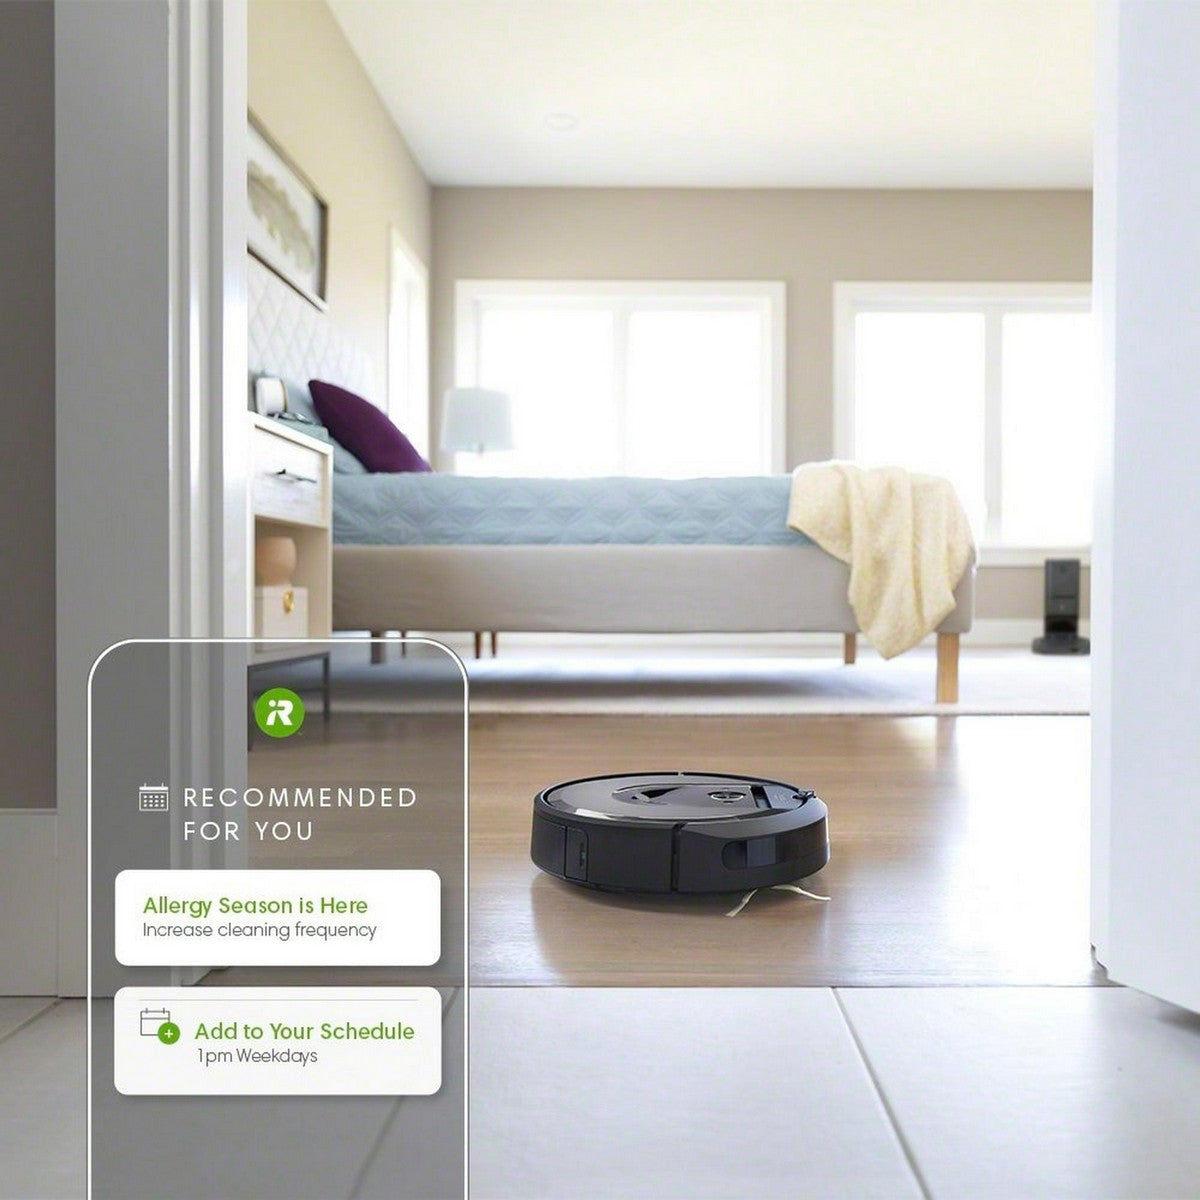 iRobot-Roomba-i7-Wi-Fi-Connected-Robot-Vacuum-Cleaner-listing-bedroom